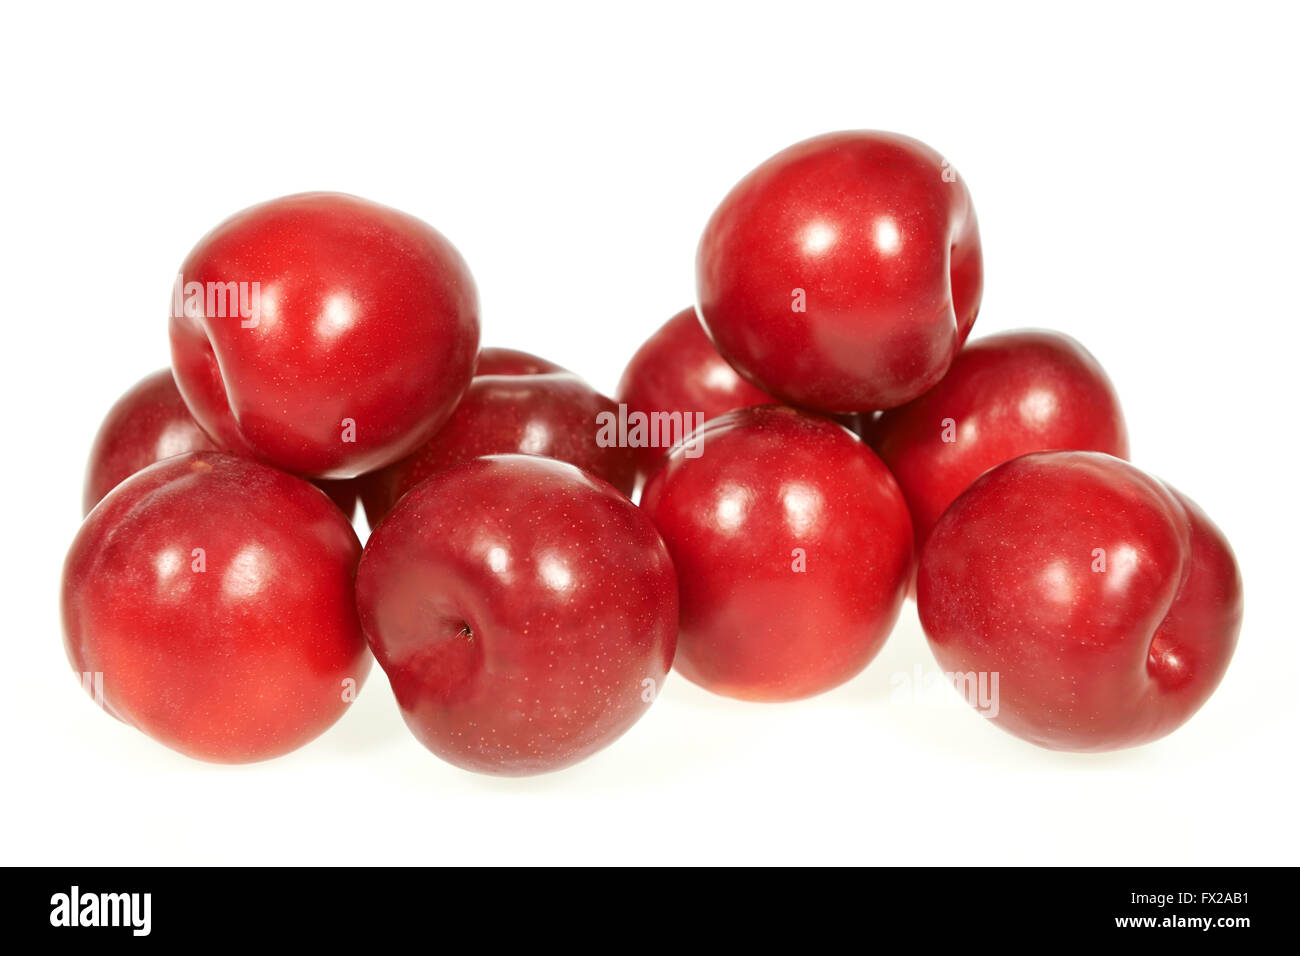 Mature plum fruits isolated on a white background Stock Photo